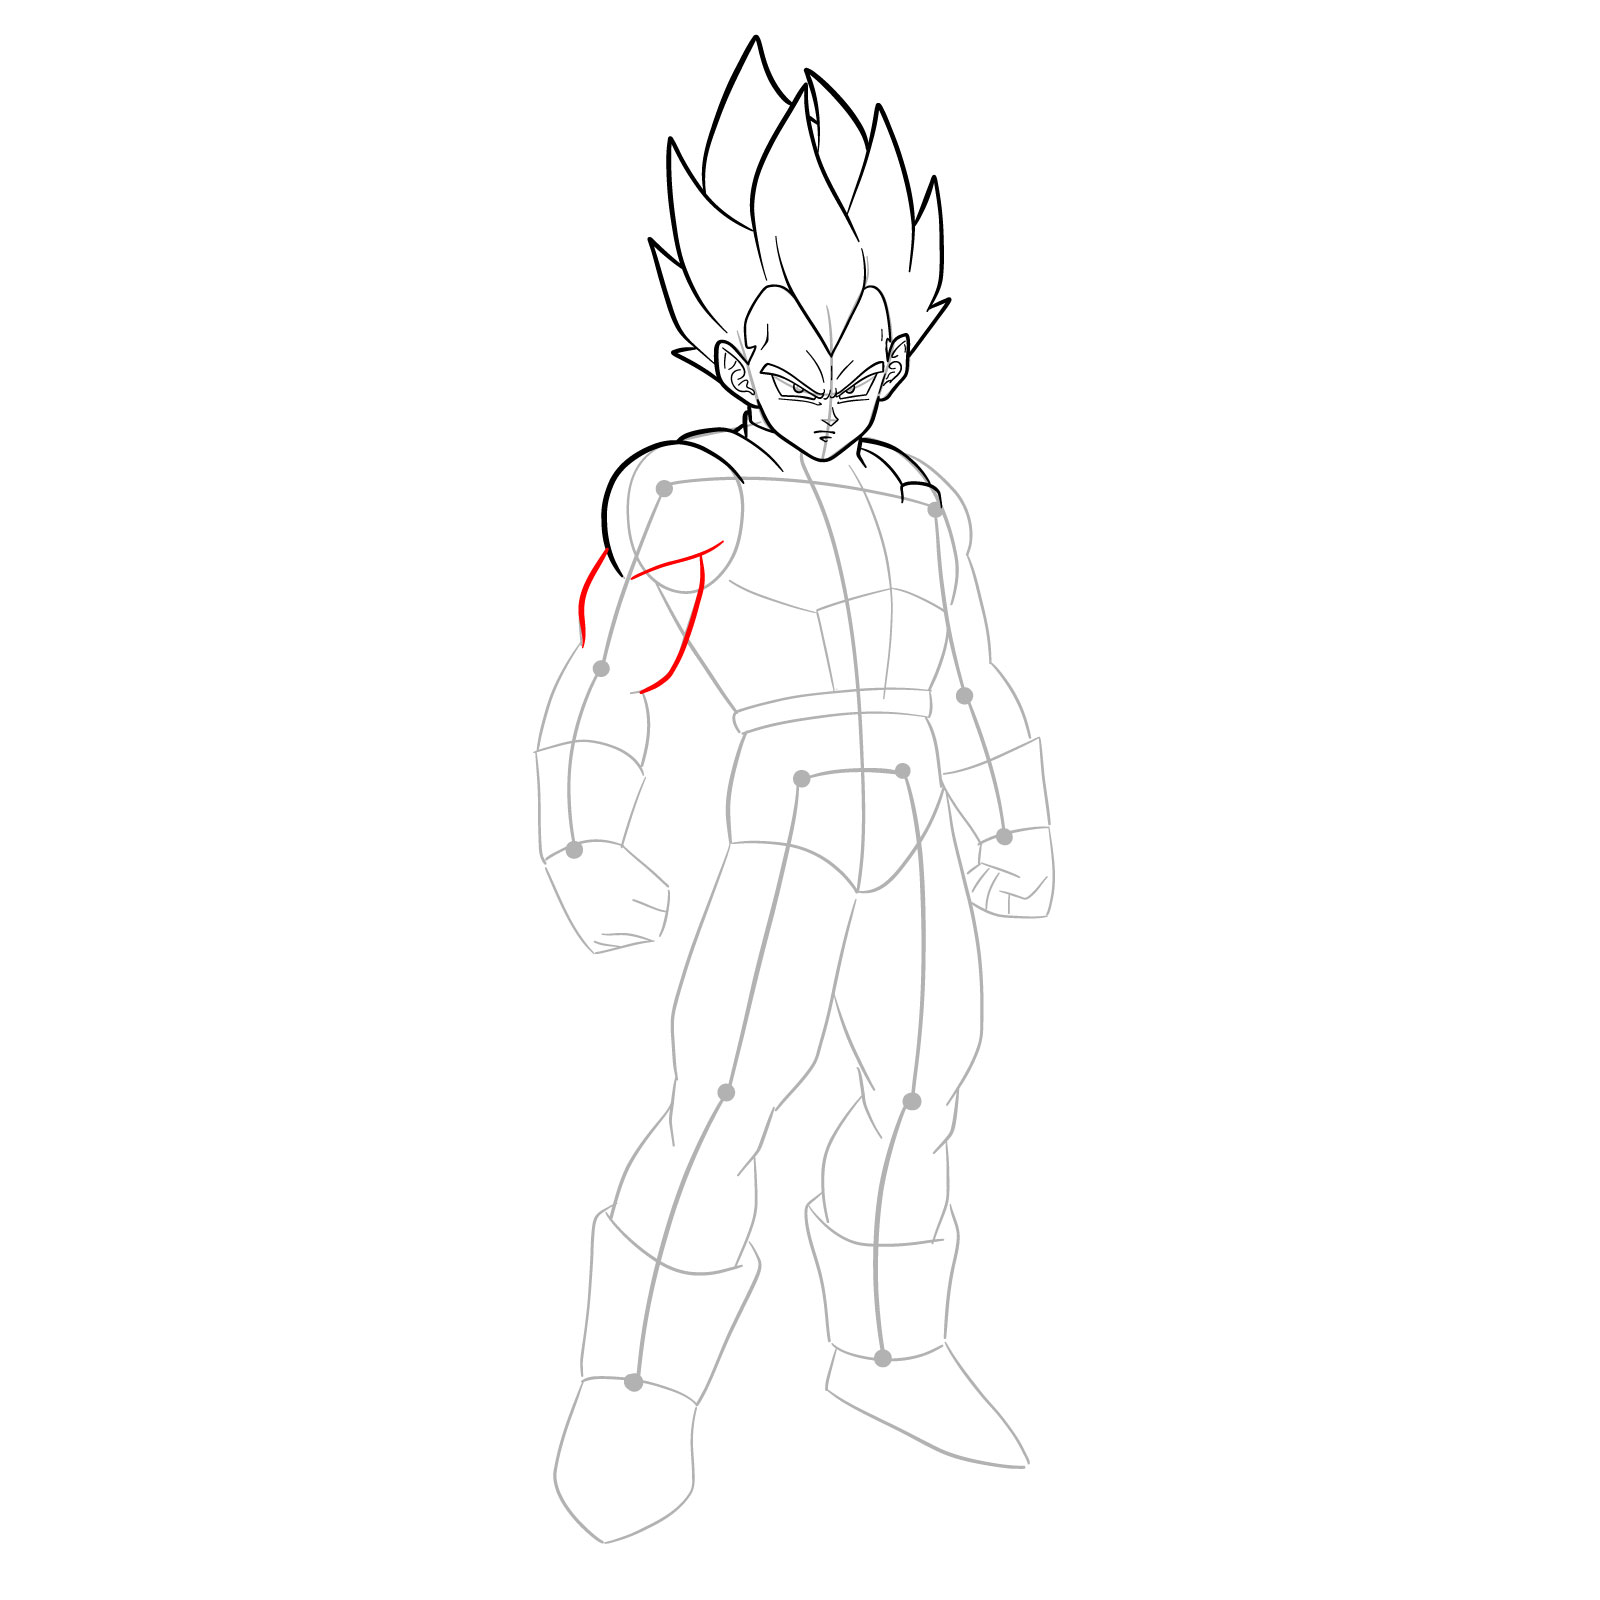 How to draw Vegeta in SSGSS - step 19